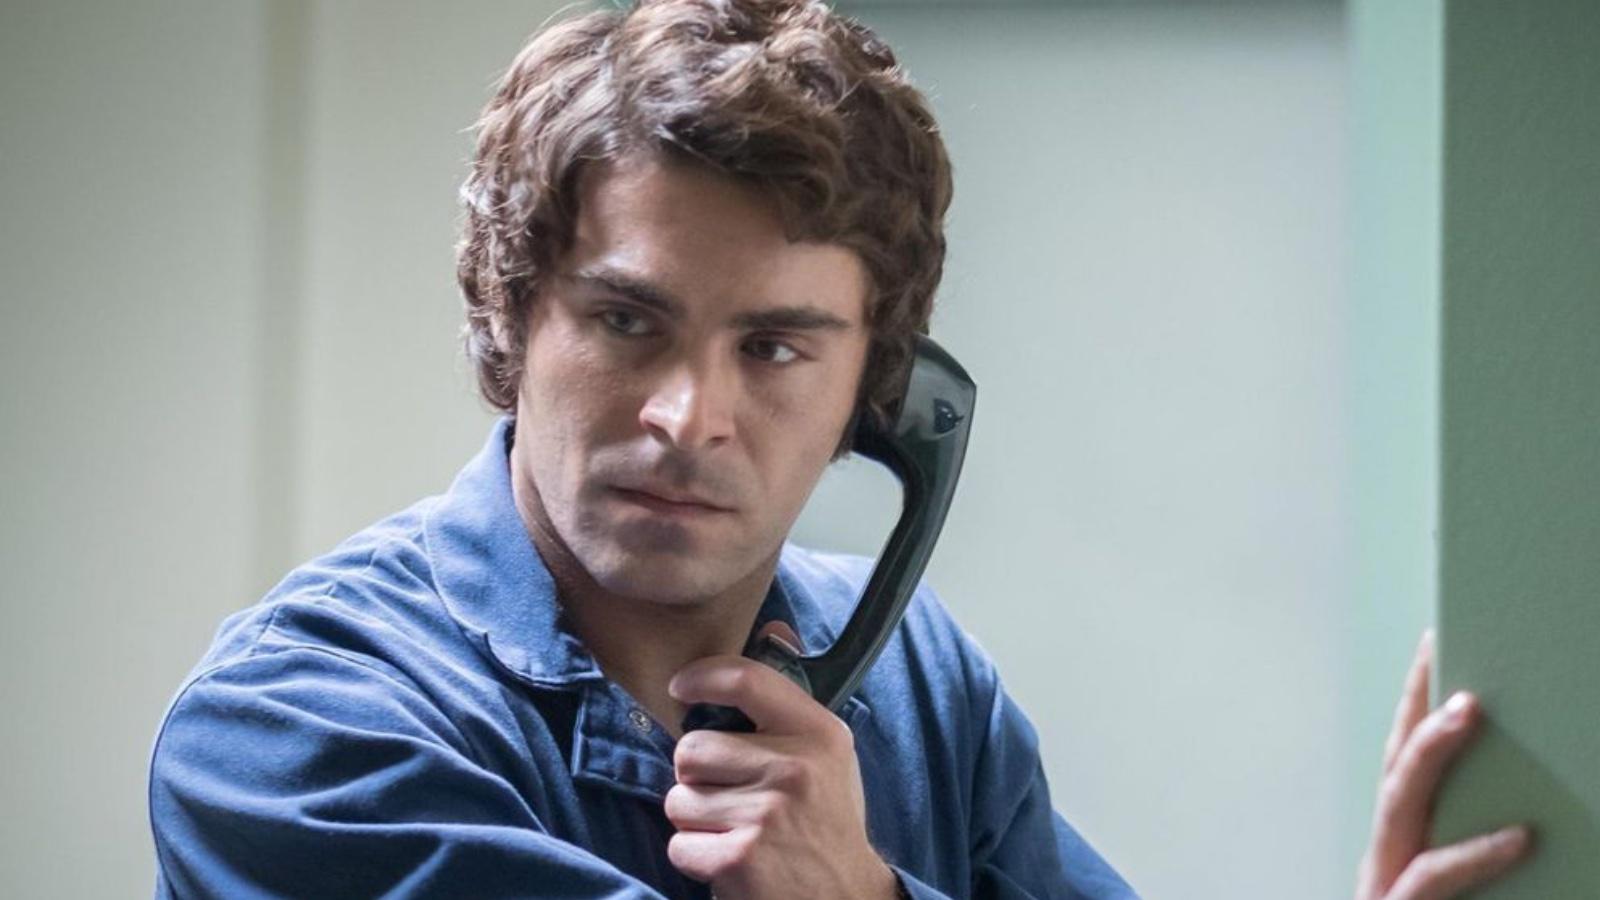 Zac Efron in Extremely Wicked, Shockingly Evil and Vile as Ted Bundy.